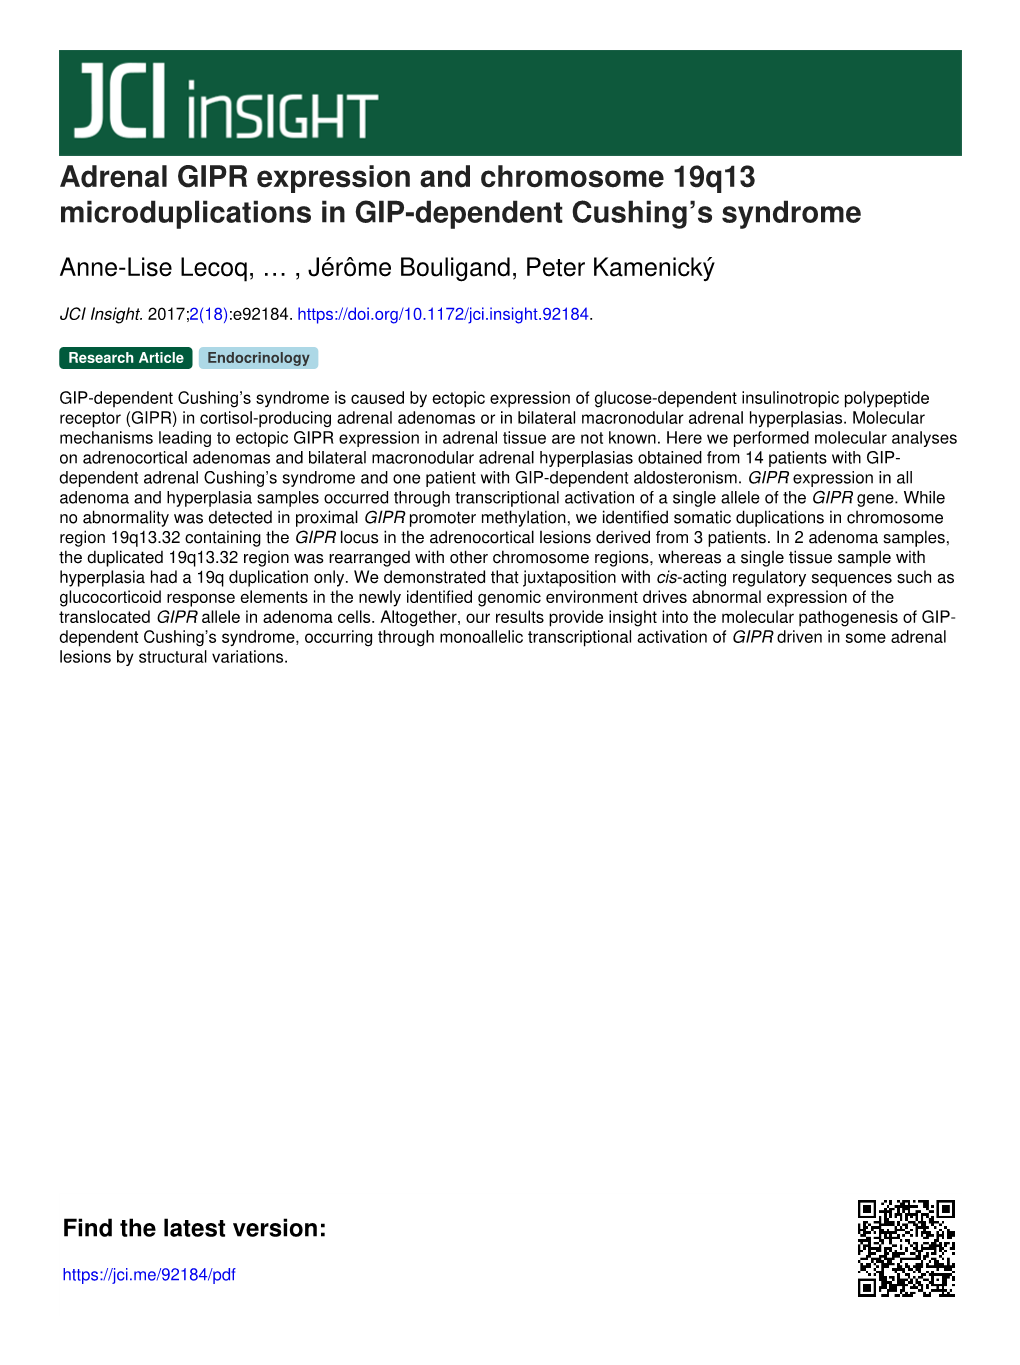 Adrenal GIPR Expression and Chromosome 19Q13 Microduplications in GIP-Dependent Cushing’S Syndrome